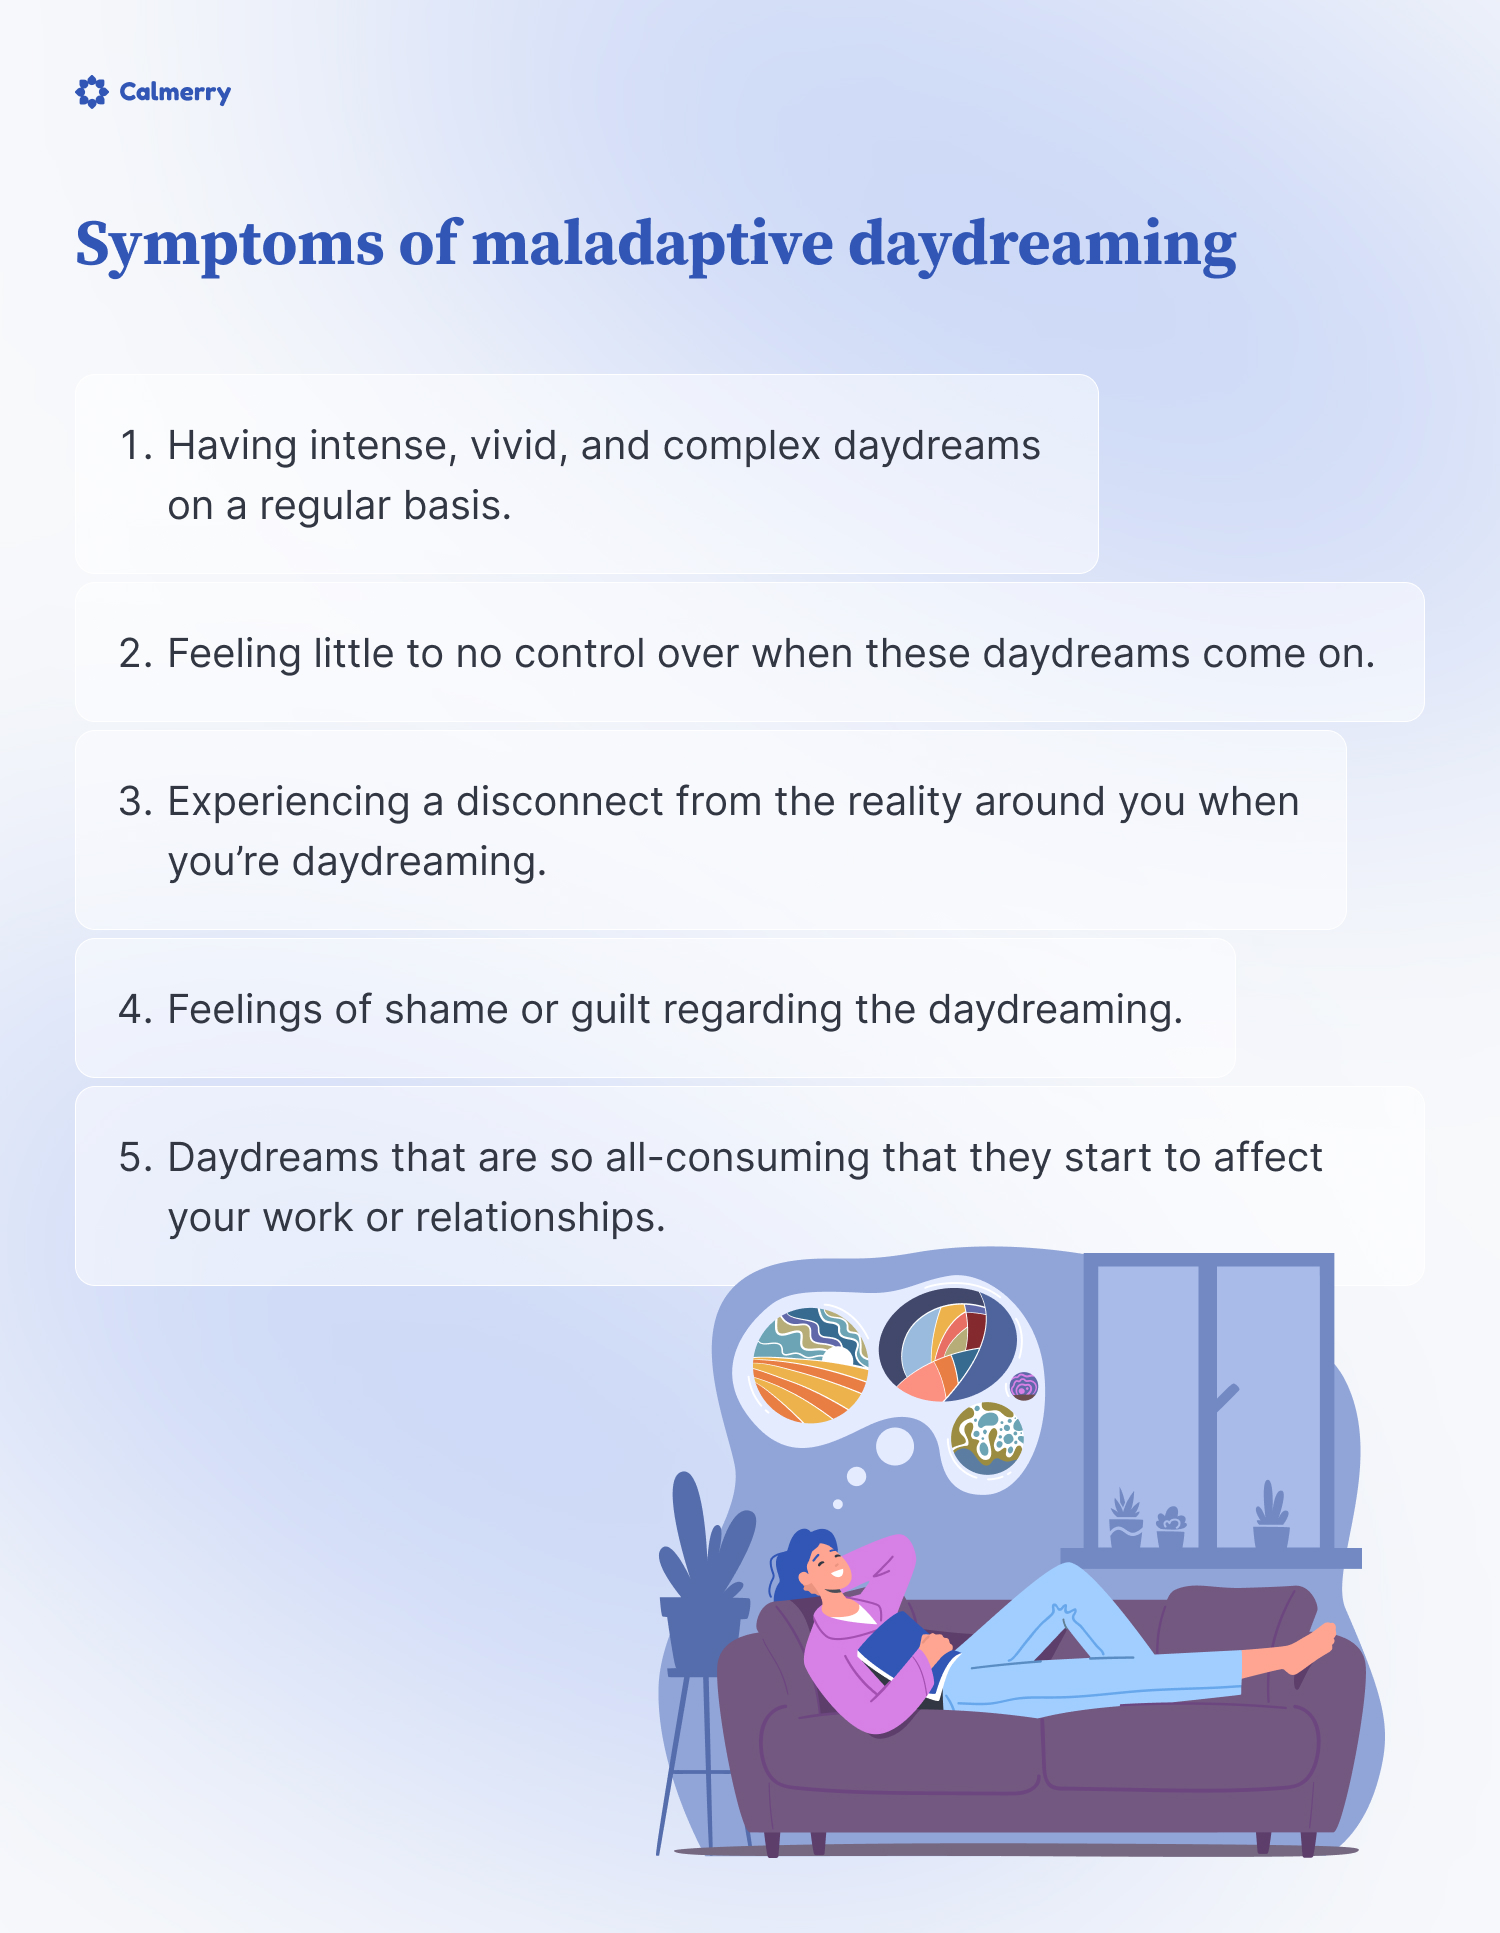 Symptoms of maladaptive daydreaming
Having intense, vivid, and complex daydreams on a regular basis
Feeling little to no control over when these daydreams come on
Experiencing a disconnect from the reality around you when you’re daydreaming
Feelings of shame or guilt regarding the daydreaming
Daydreams that are so all-consuming that they start to affect your work or relationships